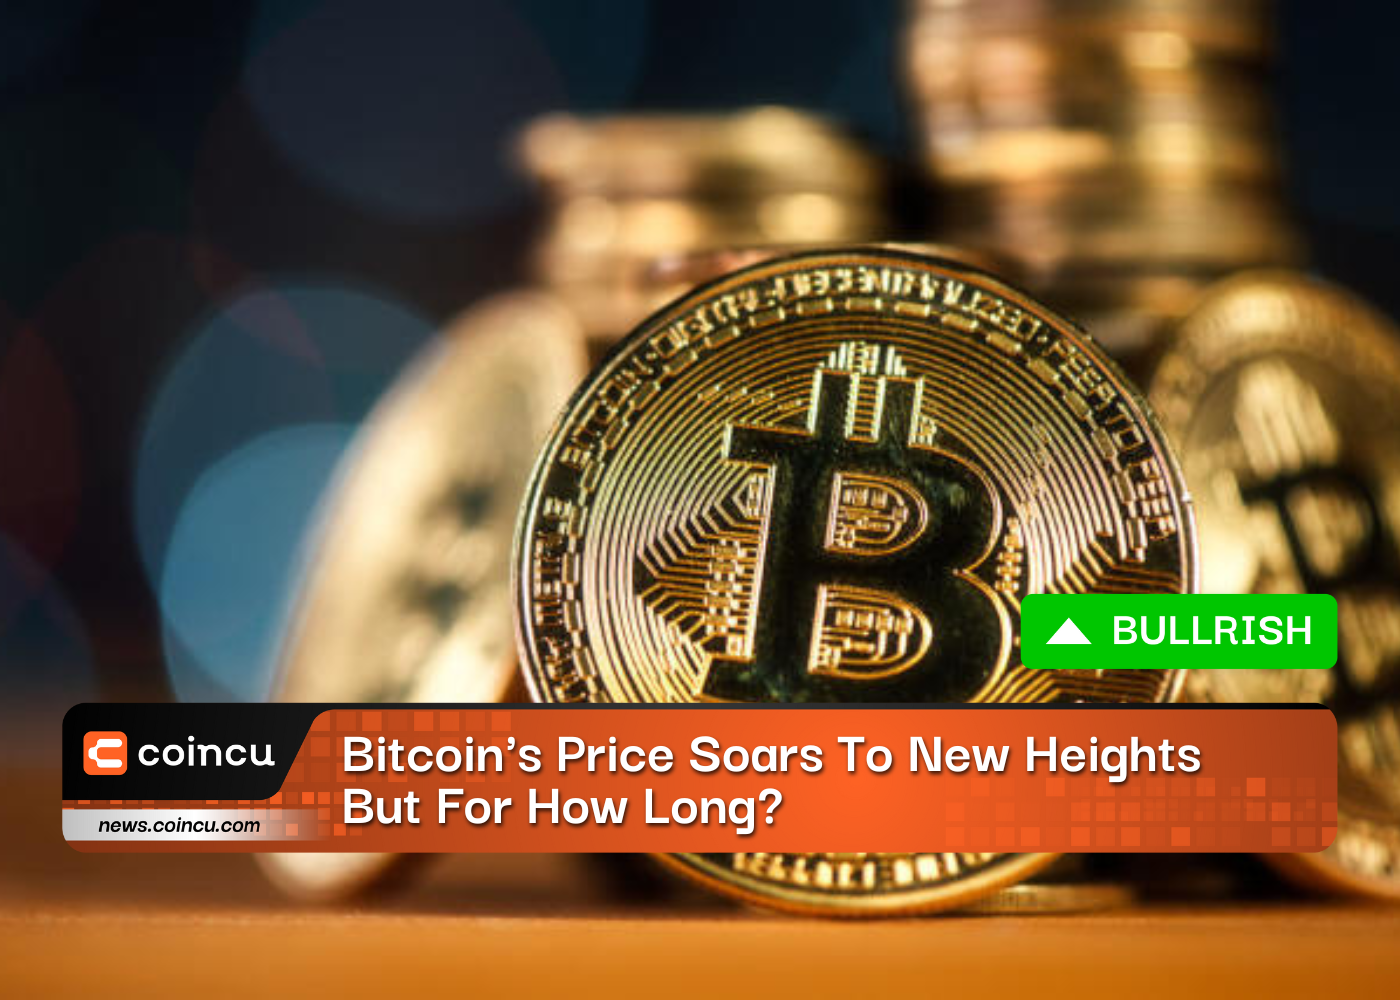 Bitcoins Price Soars To New Heights